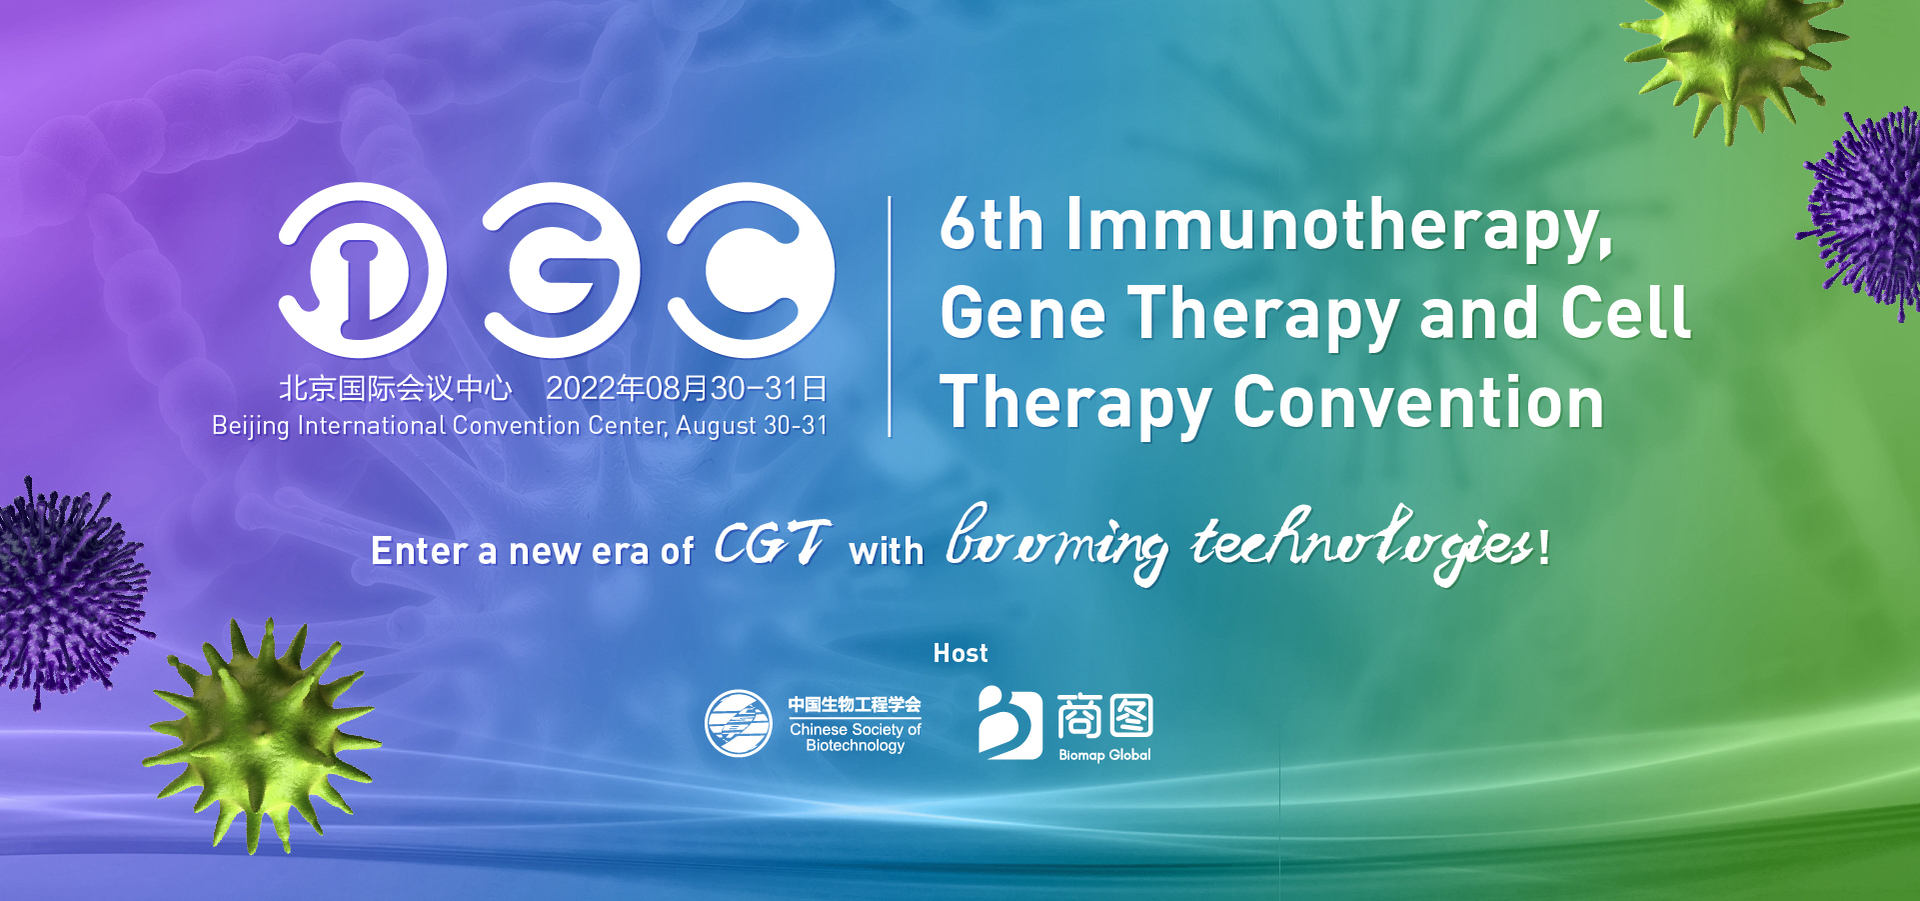 IGC 2022 6th Immunotherapy, Gene Therapy and Cell Therapy Convention